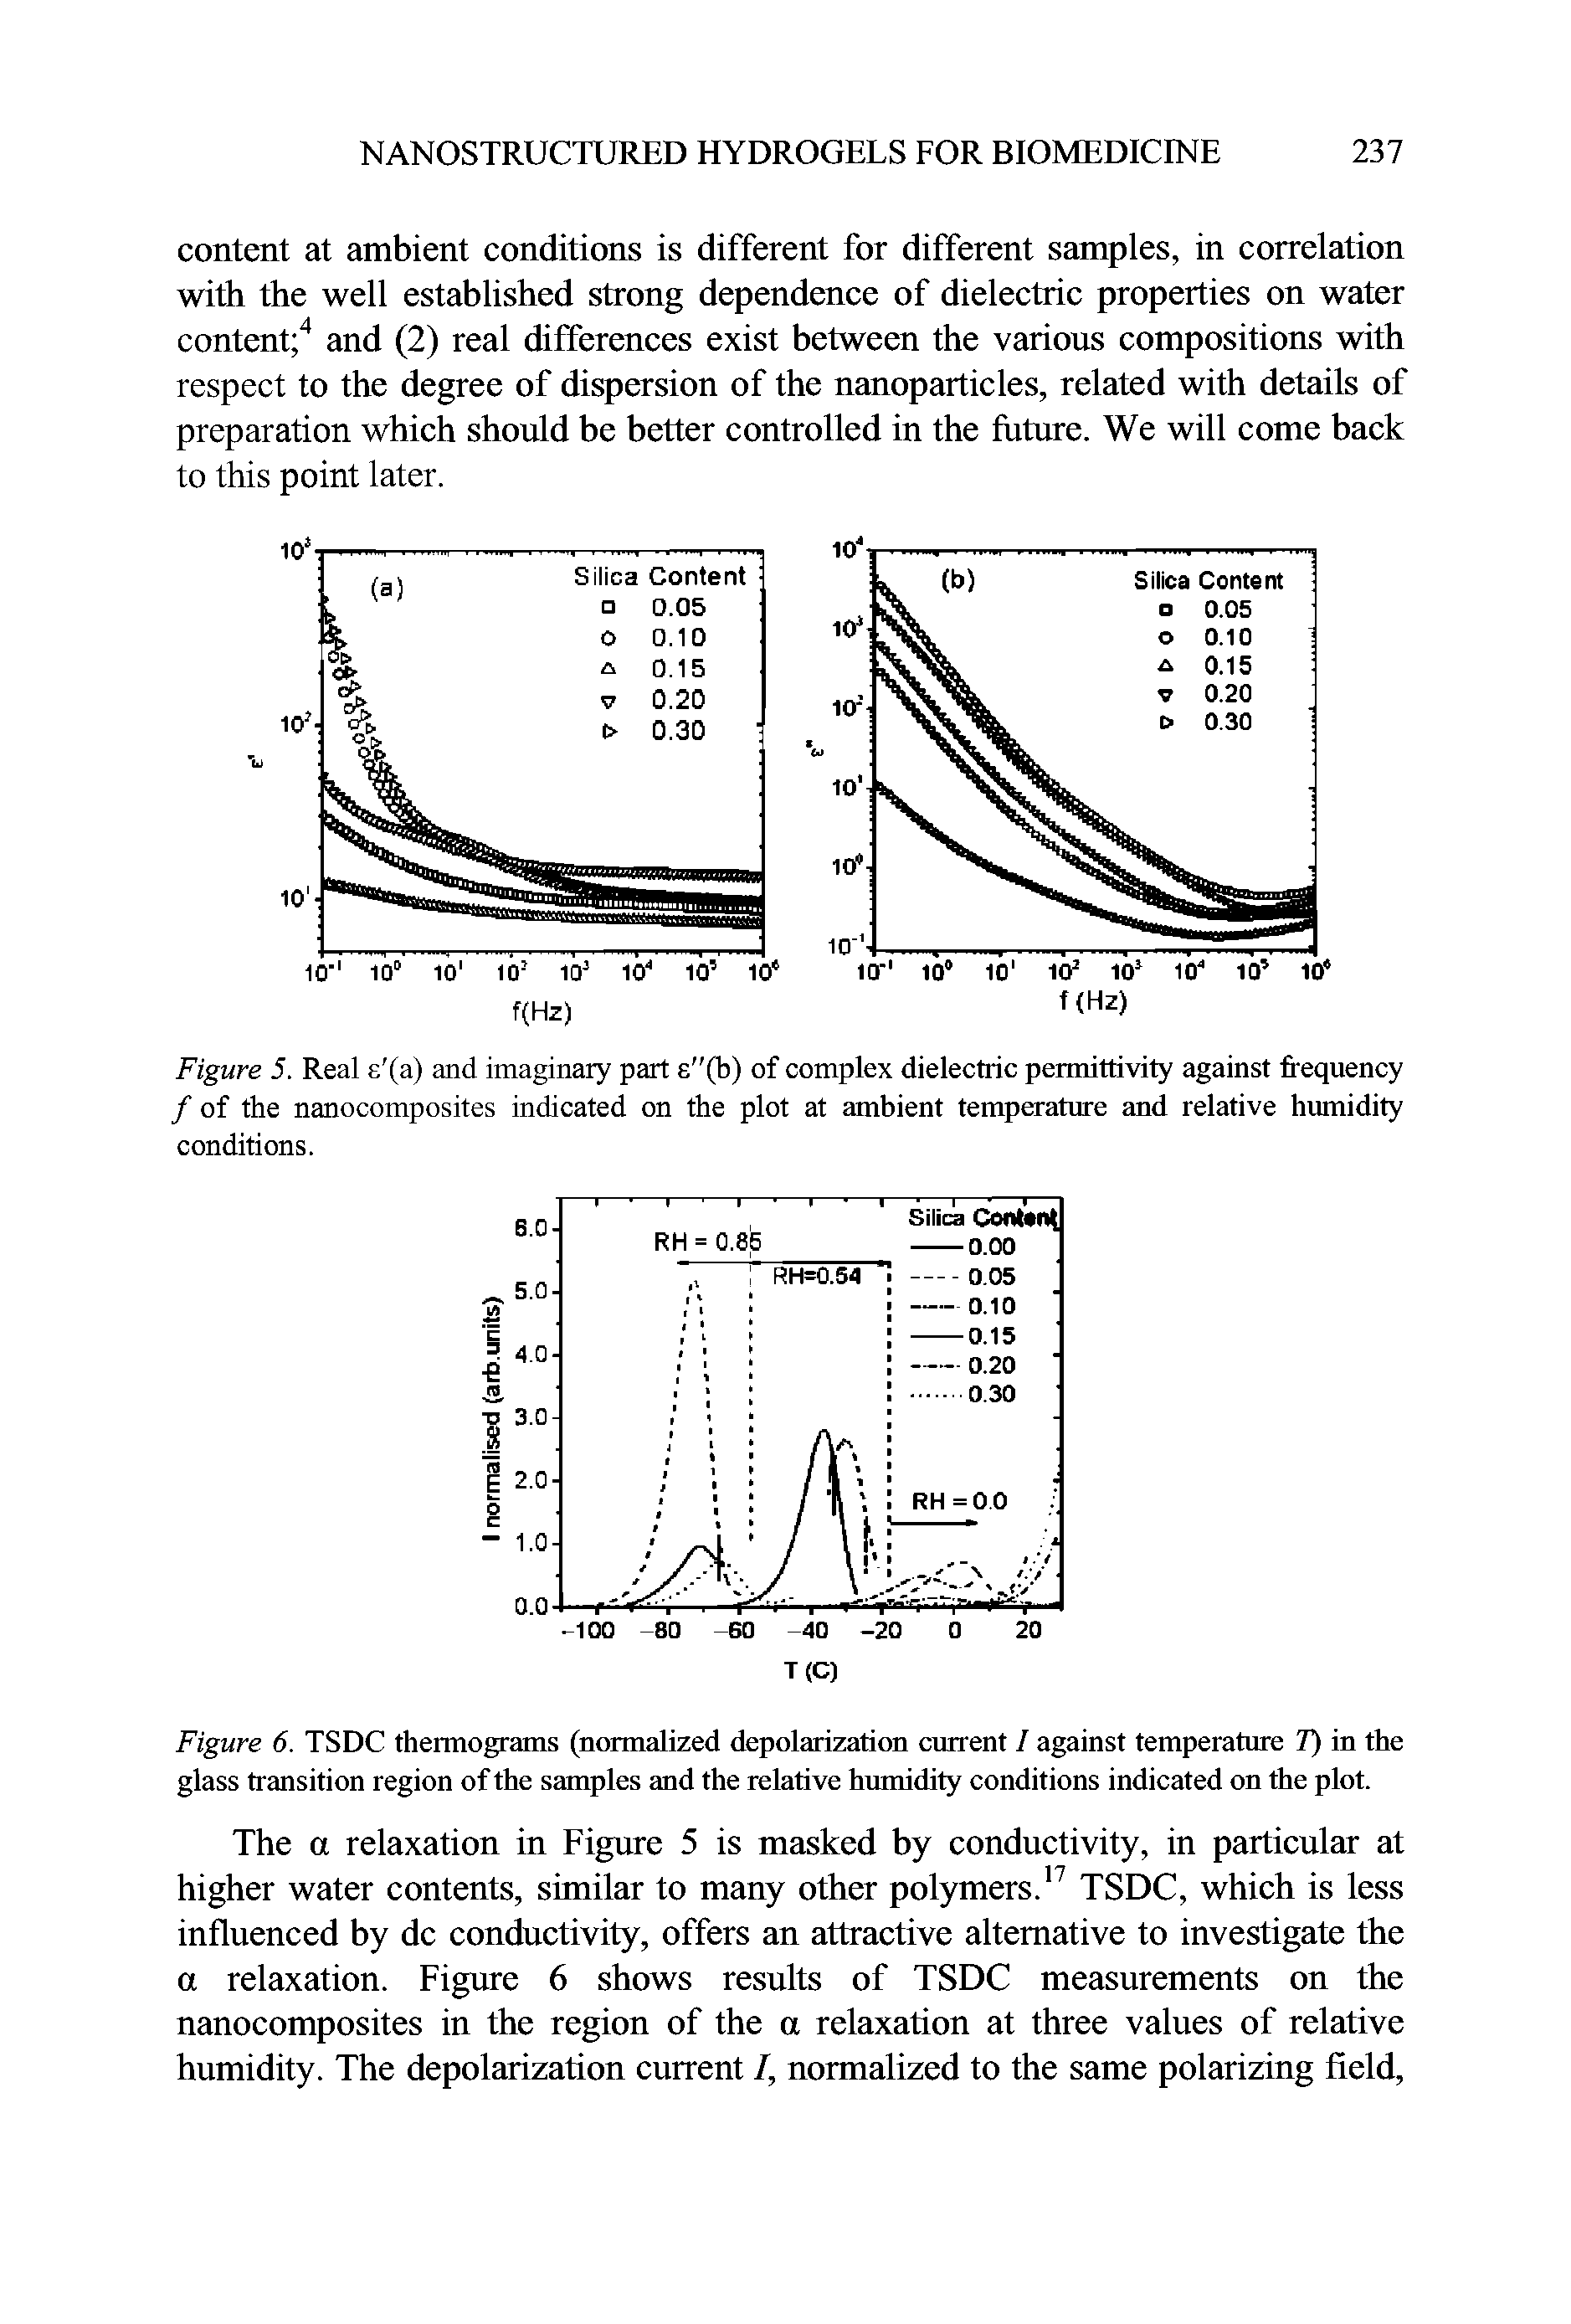 Figure 5. Real s (a) and imaginary part e (b) of complex dielectric permittivity against frequency / of the nanocomposites indicated on the plot at ambient temperature and relative humidity conditions.